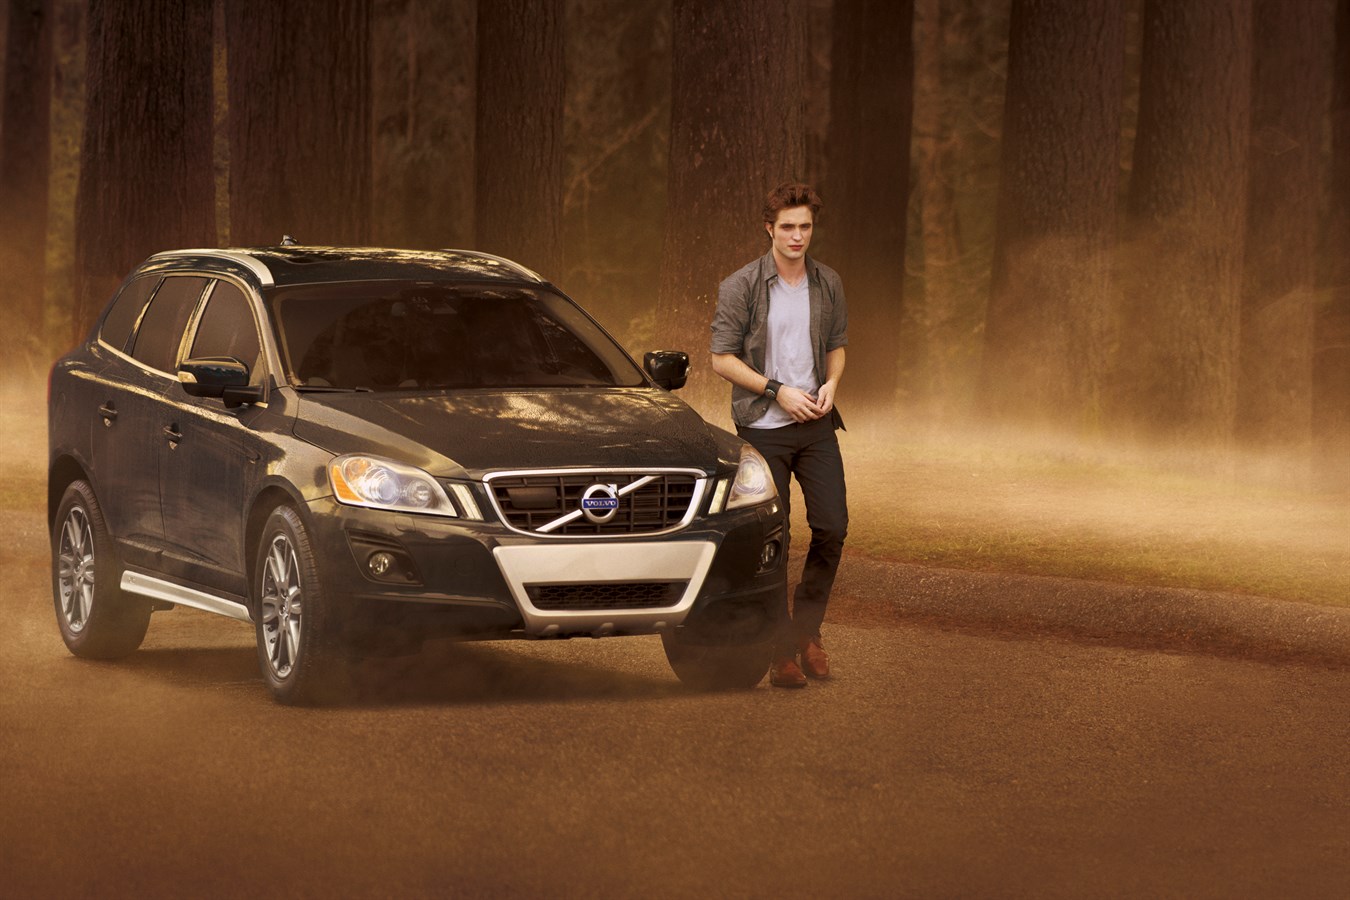 In The Twilight Saga: New Moon, Edward Cullen drives a 2010 Volvo XC60, with City Safety.